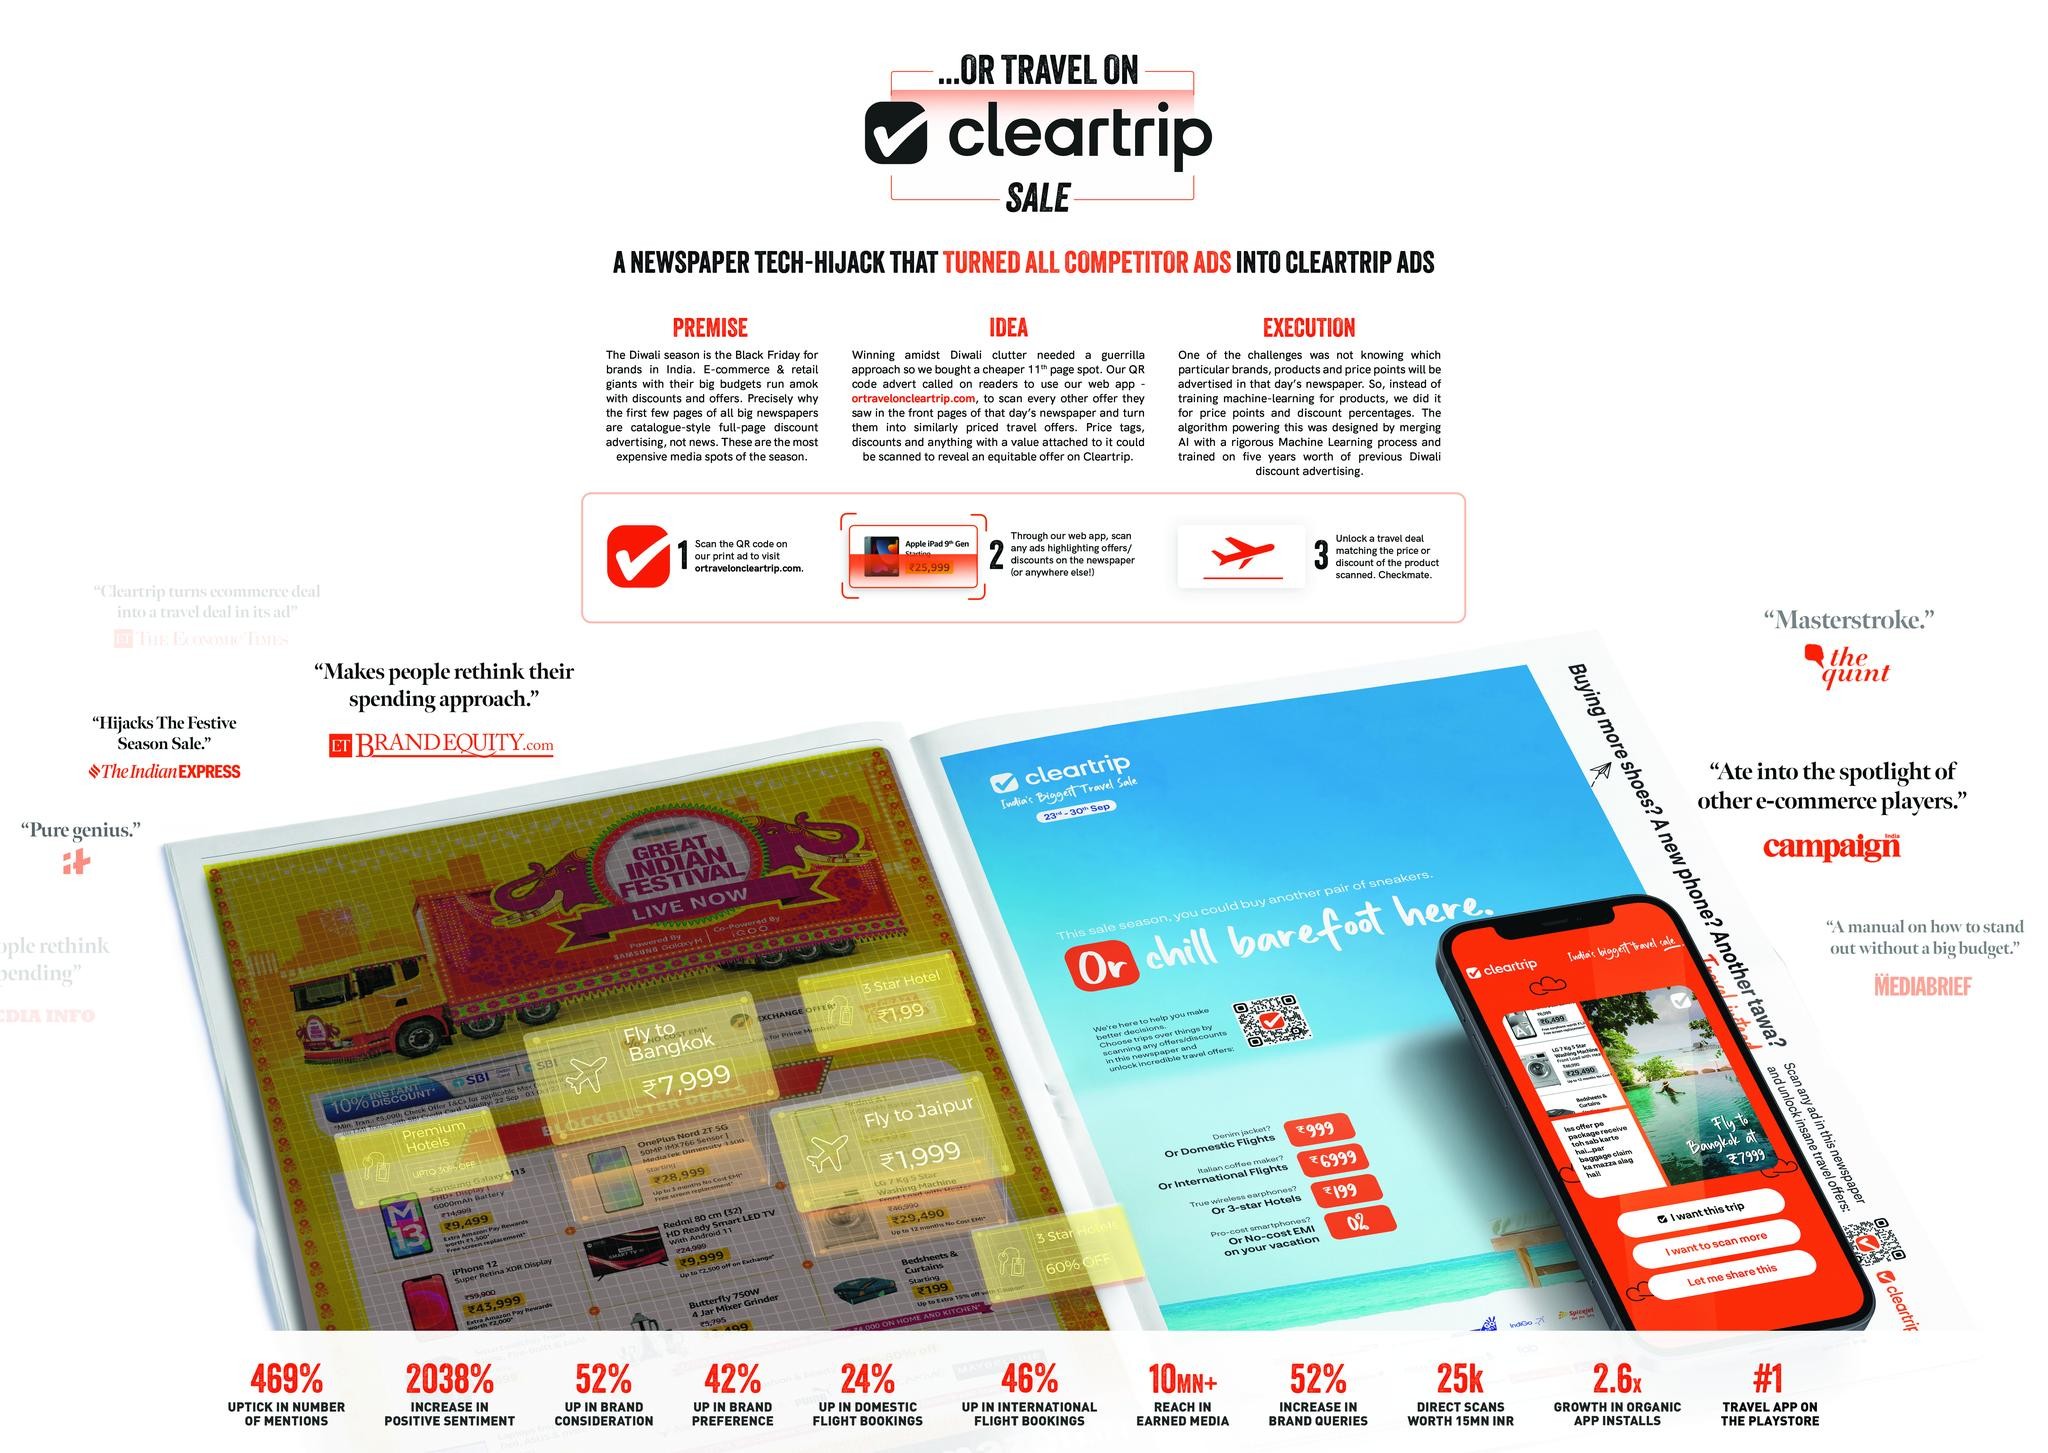 OR TRAVEL ON CLEARTRIP